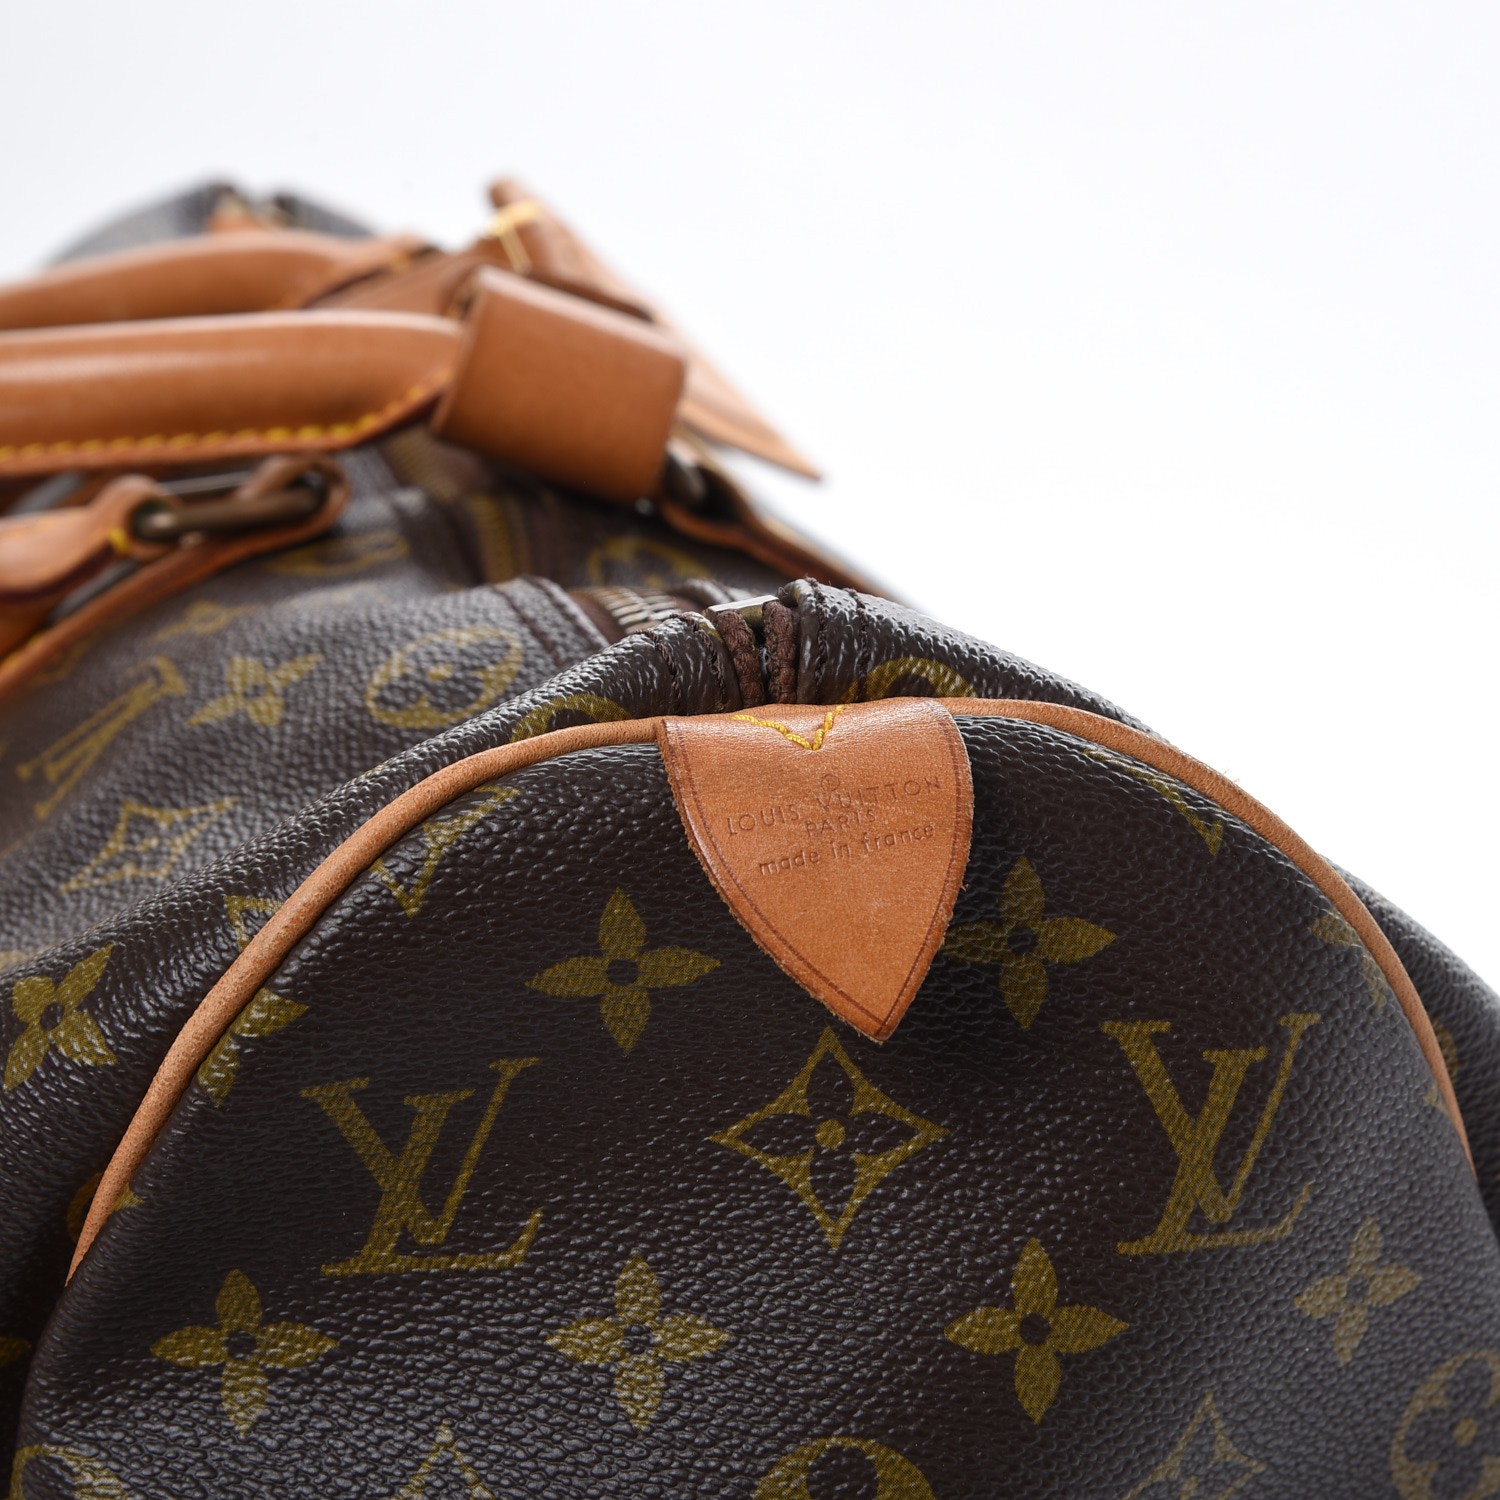 LOUIS VUITTON KEEPALL BAG 45, 50 & 55 REVIEW: BEST SIZE? 🤔 KATE